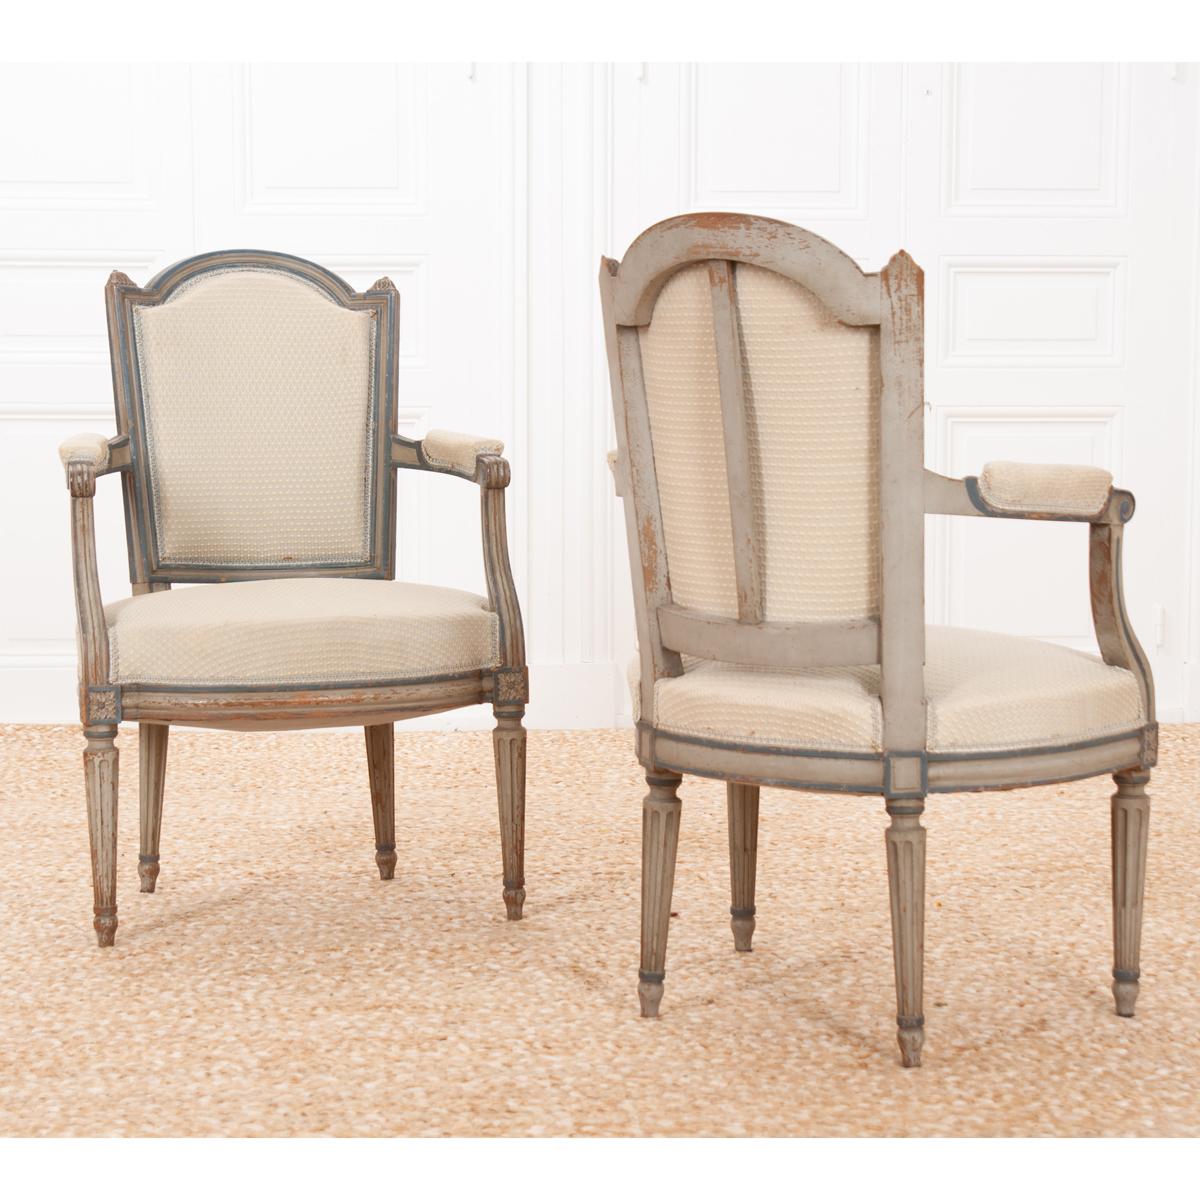 A lovely pair of painted fauteuils, upholstered in antique fabric. The armchairs are beautifully carved and painted, with both the paint and hardwood acquiring an exceptional patina over time. The frame sports an antiqued light gray/blue paint with